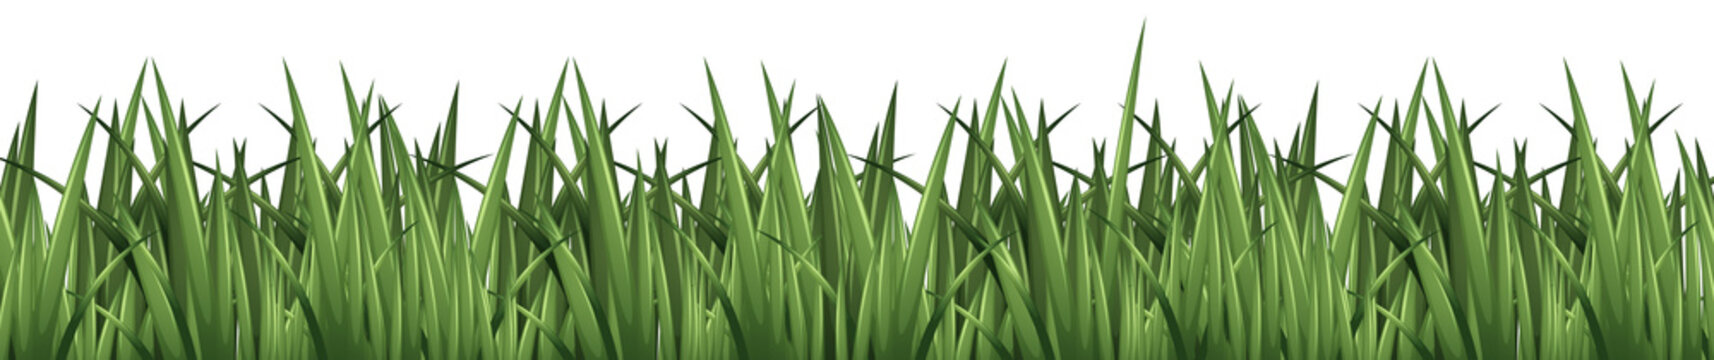 Seamless background design with green grass